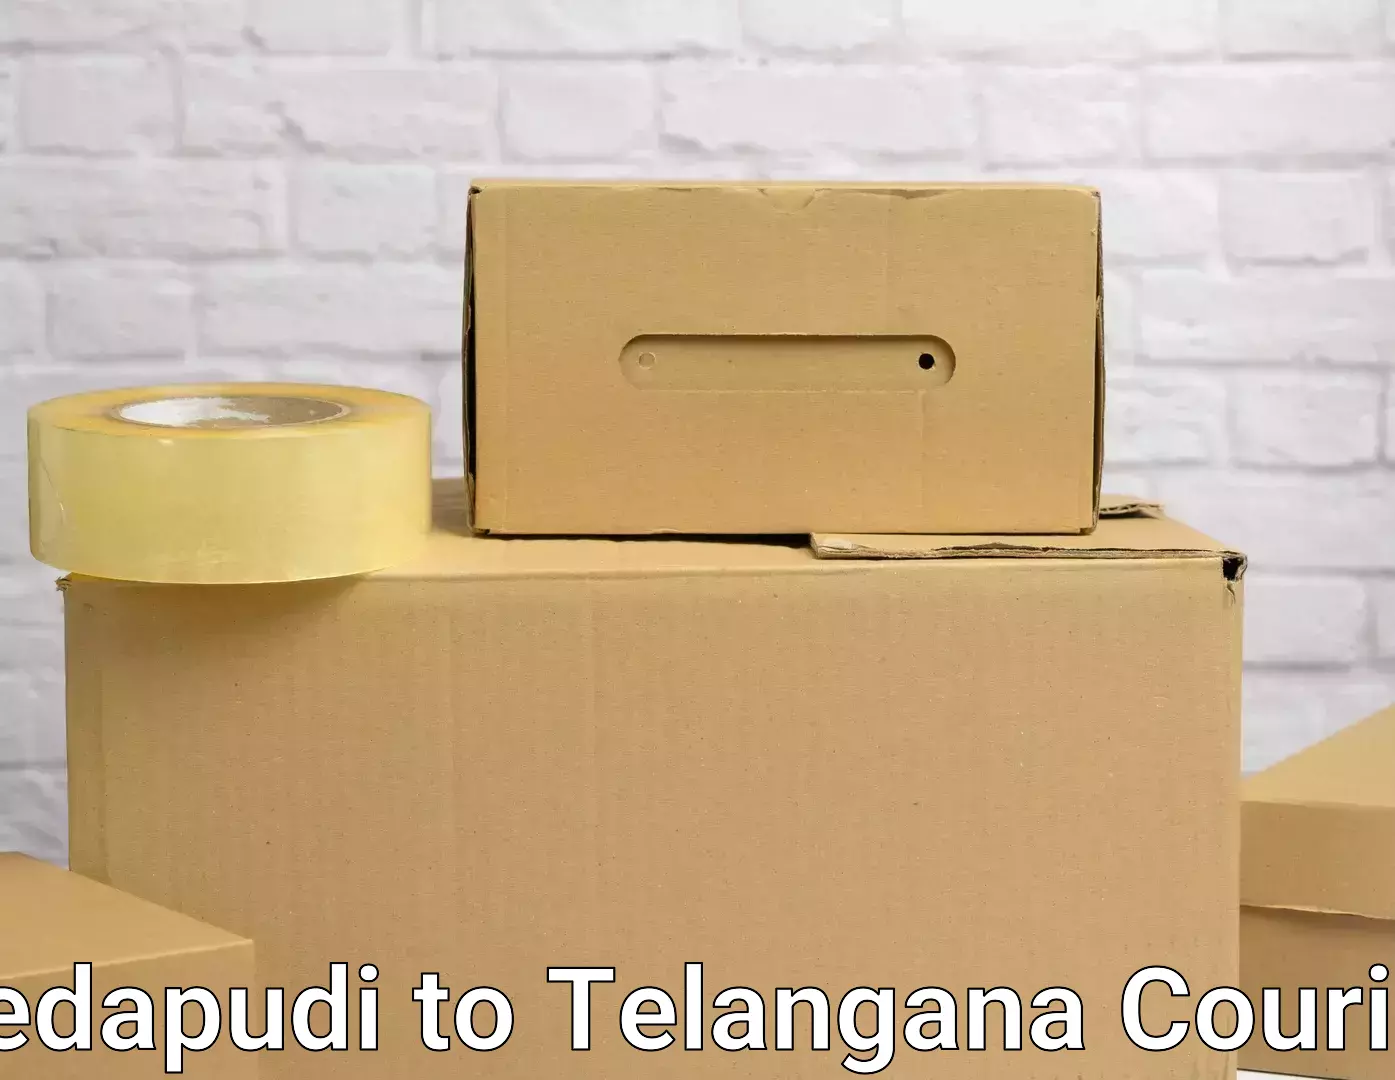 Residential relocation services Pedapudi to Warangal